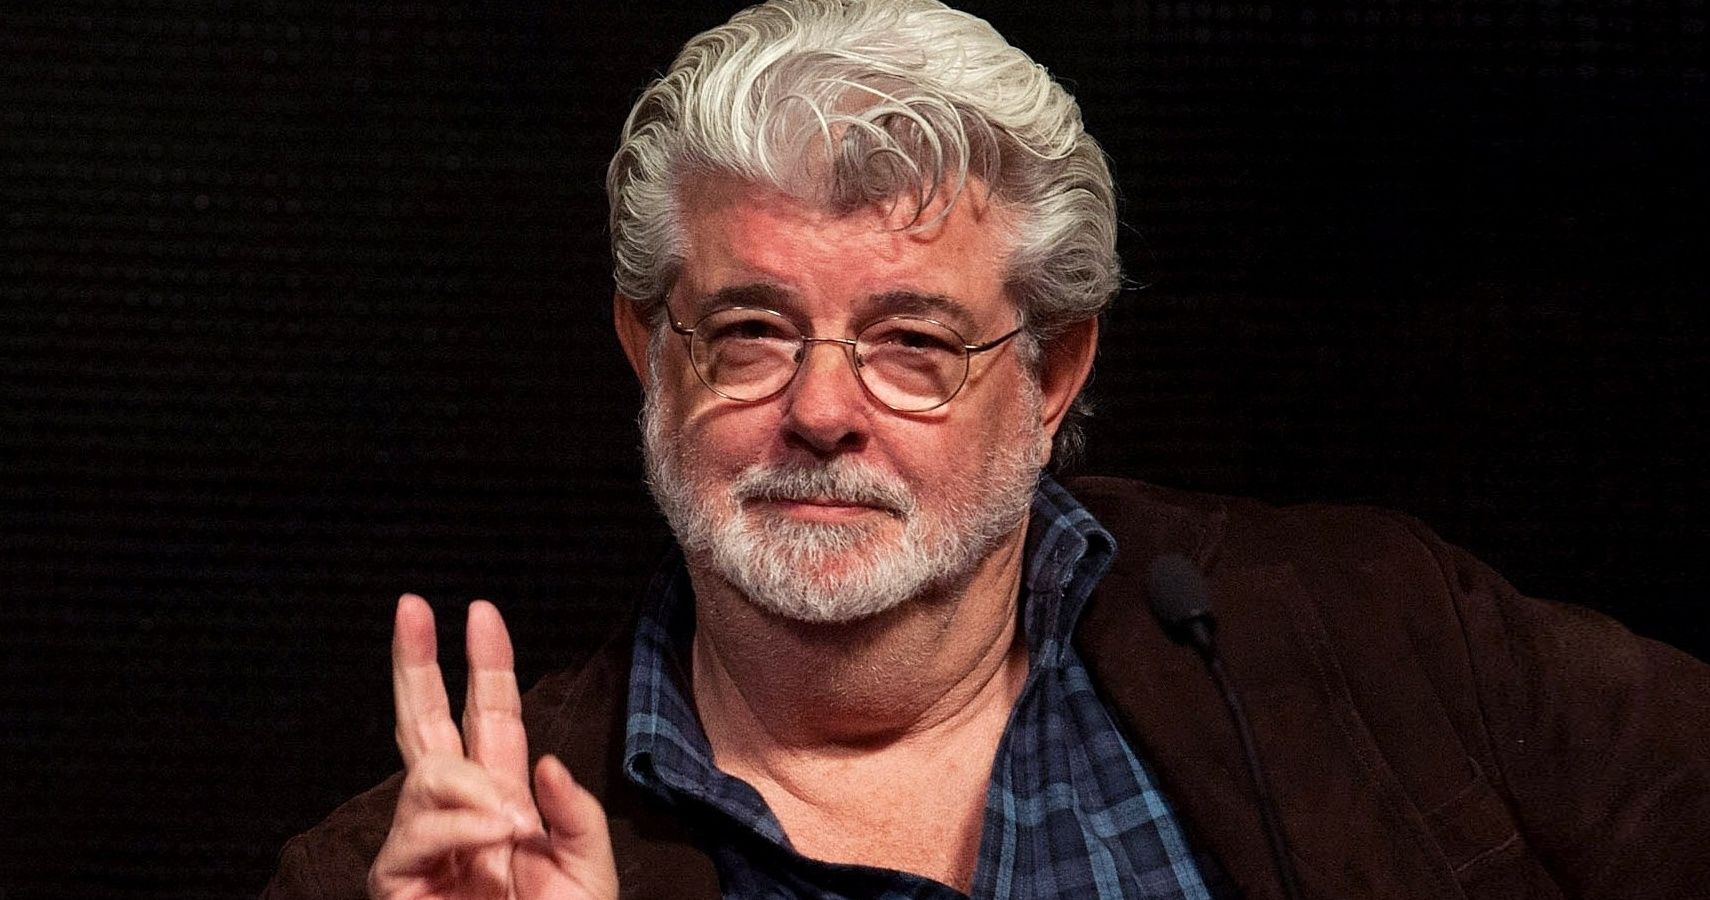 George Lucas 10 Highest Grossing Movies (According To Box Office Mojo)